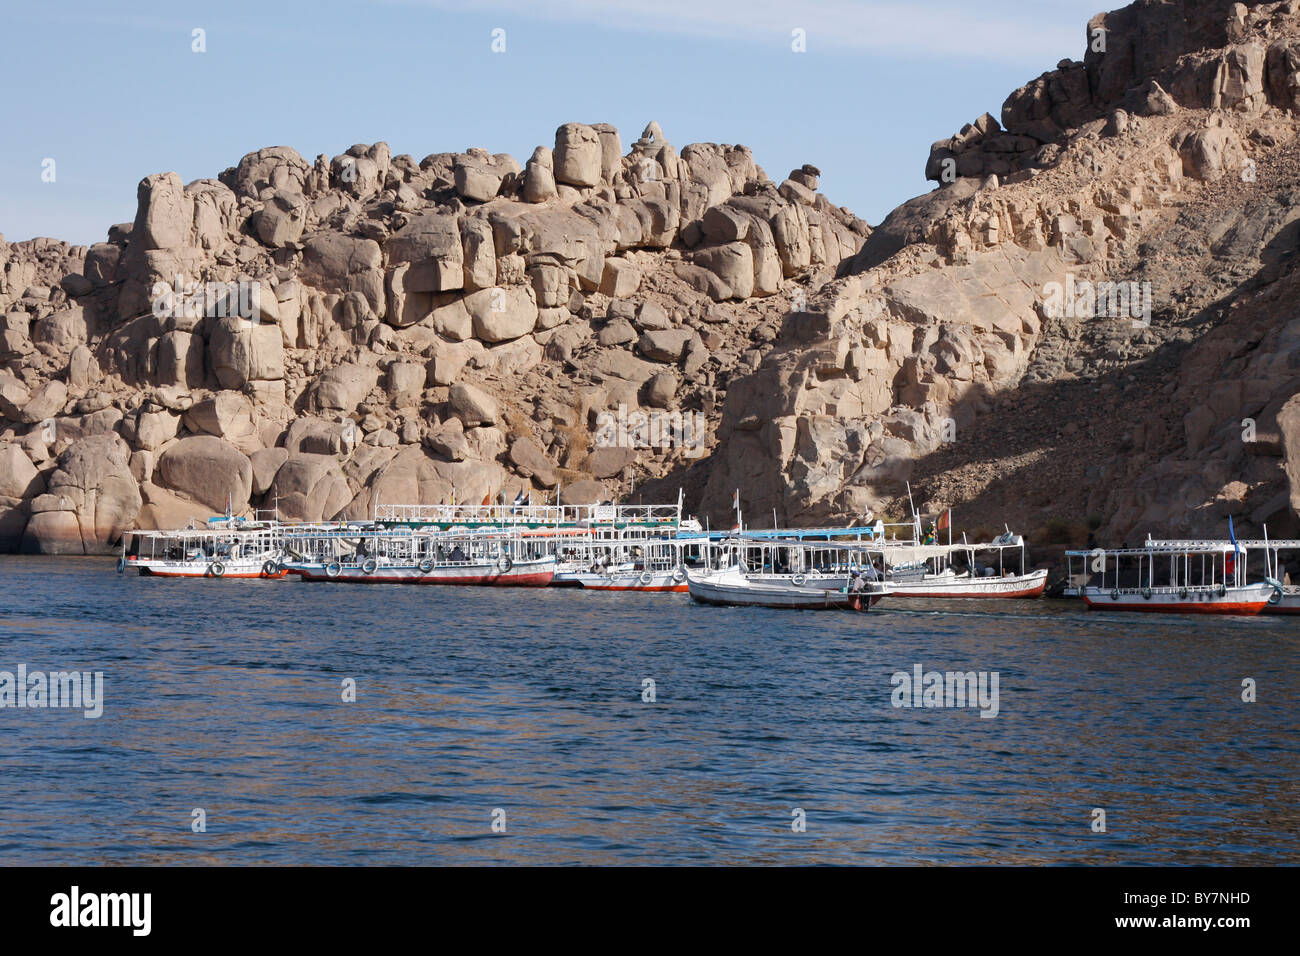 Tourist boats visiting the Temple of Philae, Lake Nasser, Egypt Stock Photo